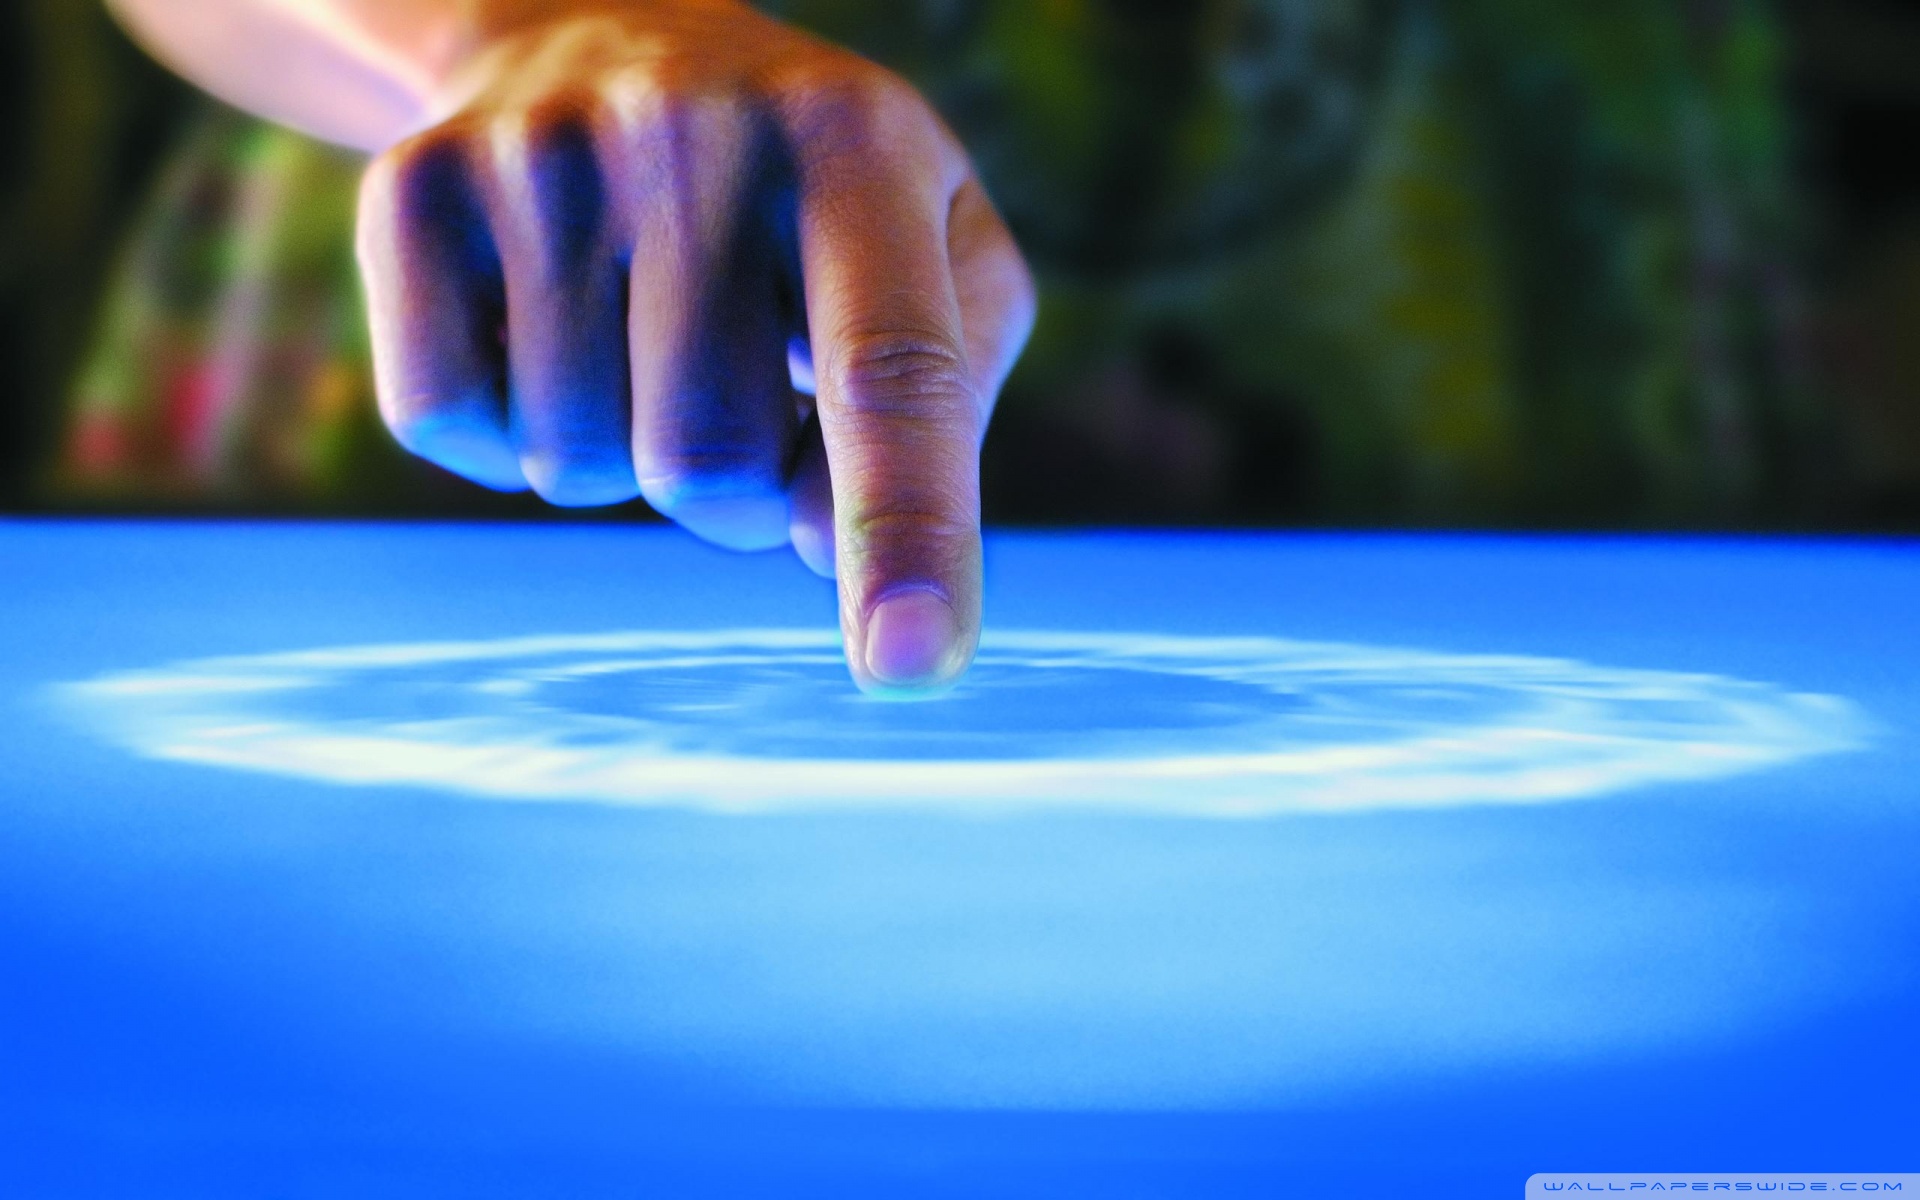 hd touch screen mobile wallpaper,blue,water,finger,hand,sky